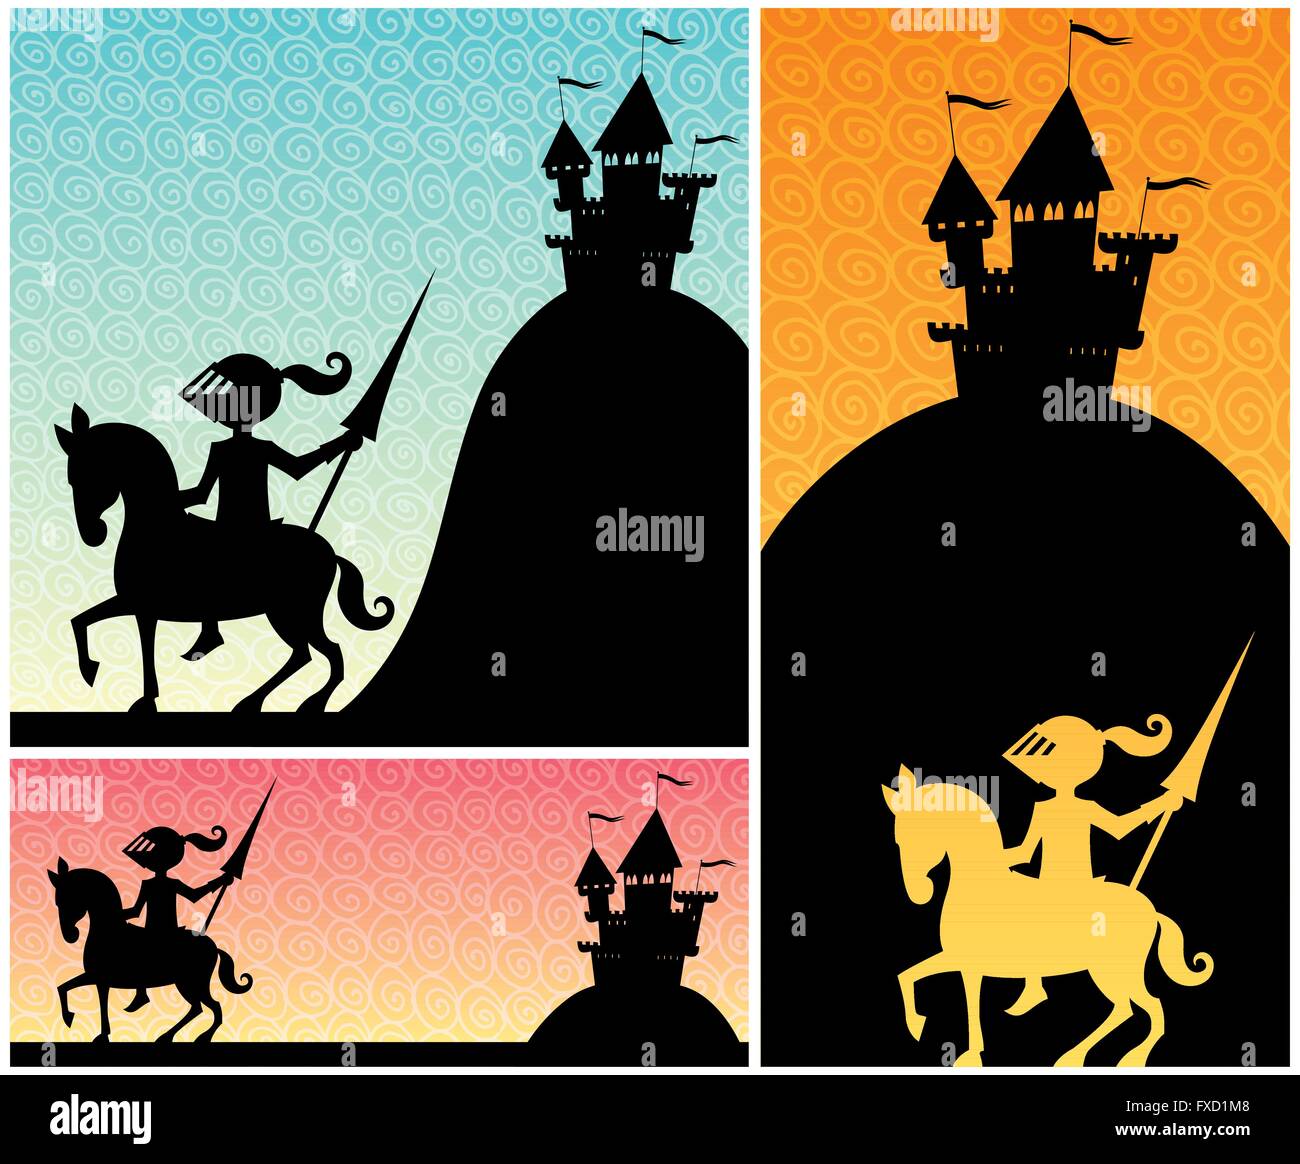 Set of cartoon banners with knight and castle silhouettes, and copy space for your text. Stock Vector